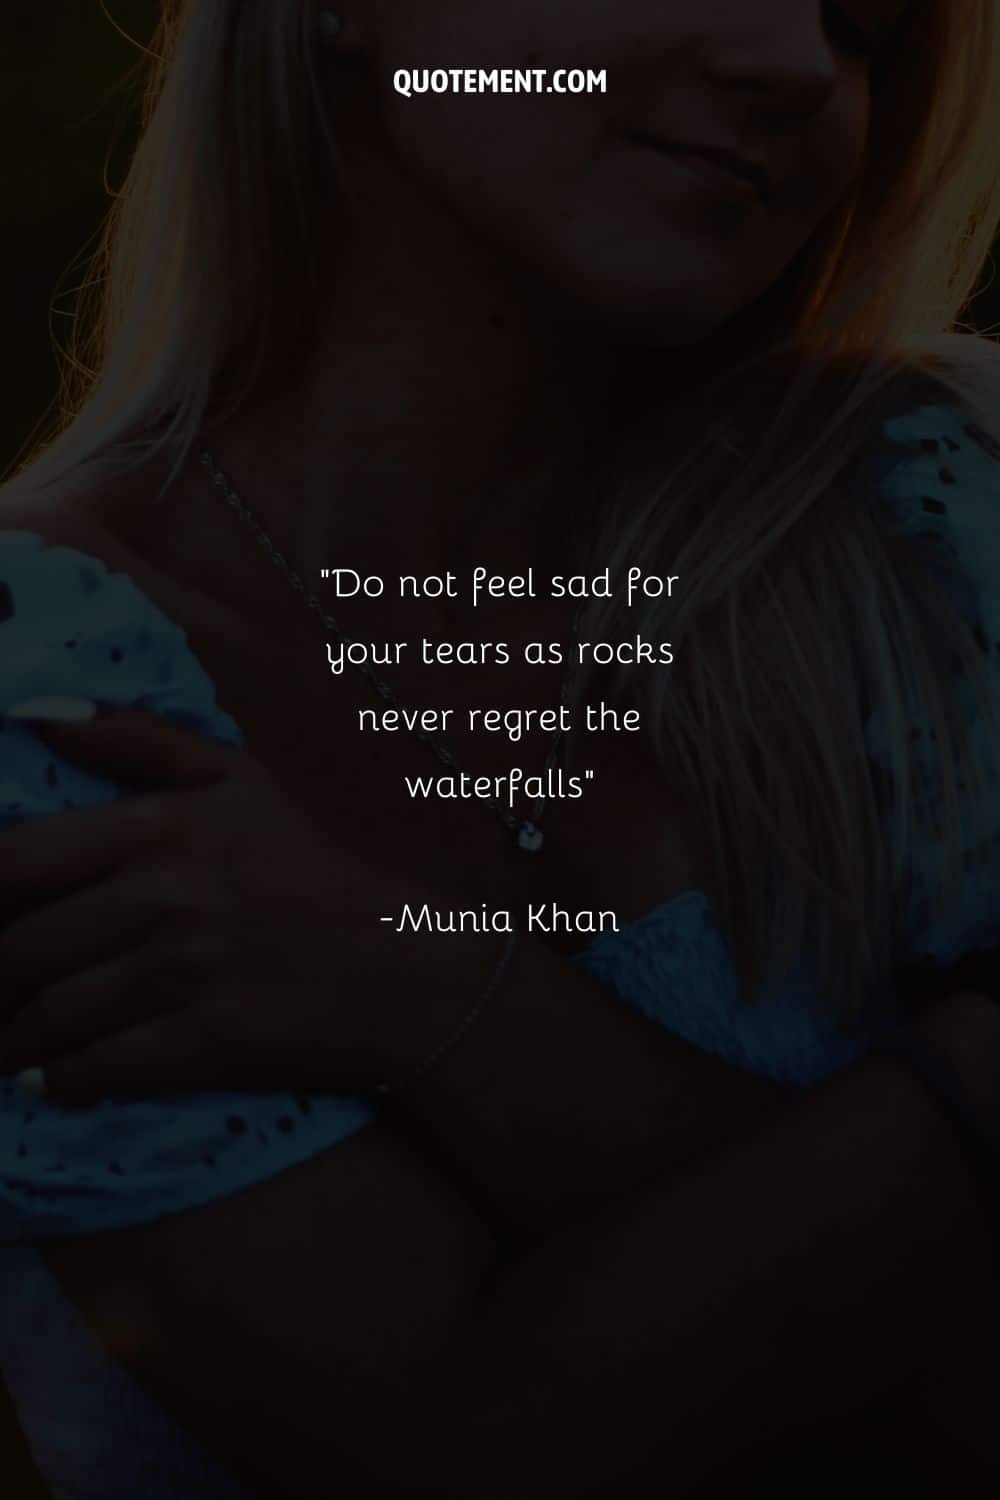 A woman with golden locks and white manicured nails representing a quotation about regret